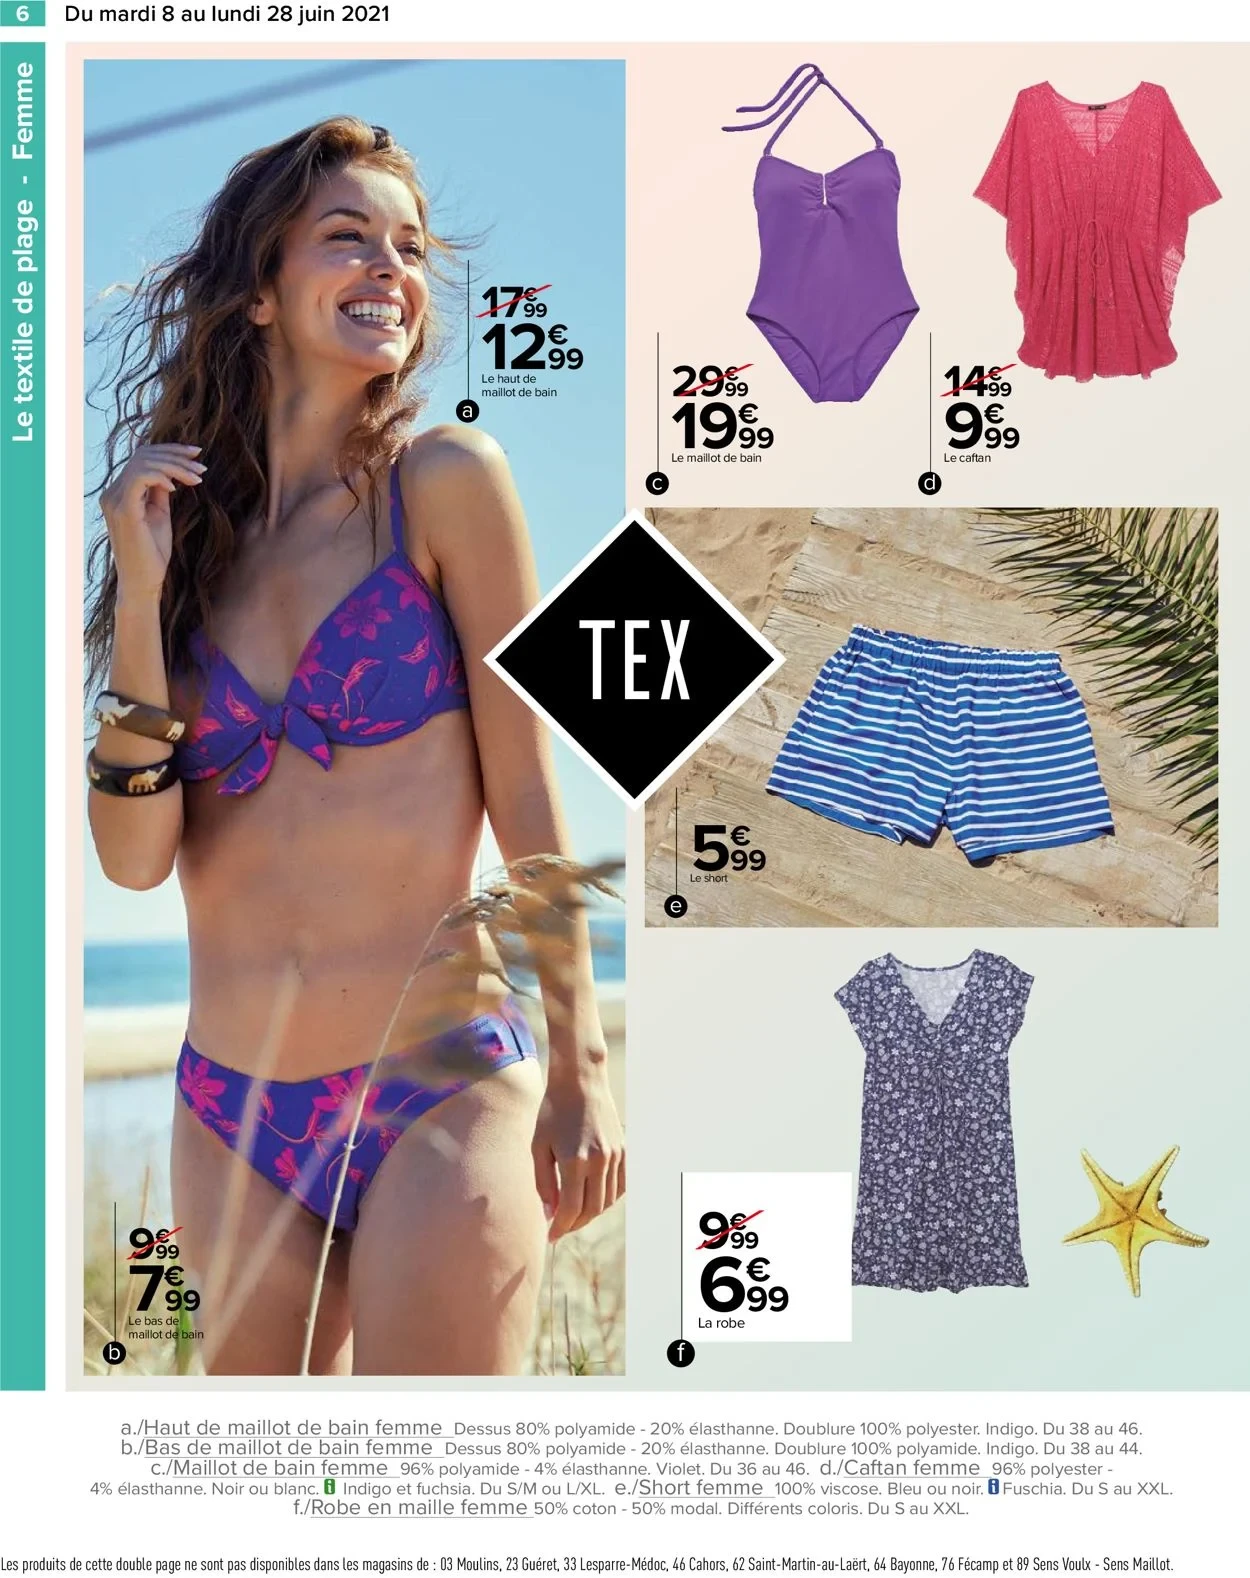 Beautiful models for the Tex Carrefour 2021 beachwear collection (including  a stunning mixed-race!) - Model ID - Bellazon